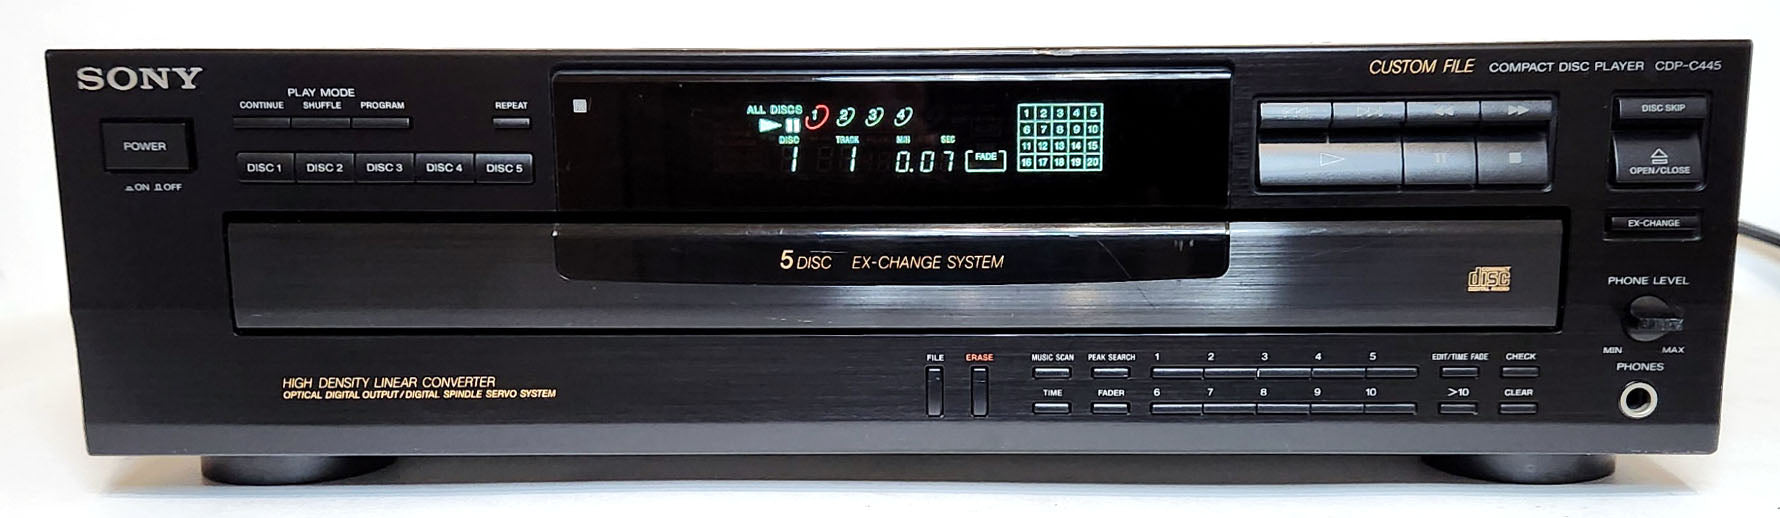 Sony CDP-C445 5-Disc Carousel CD Changer - Front